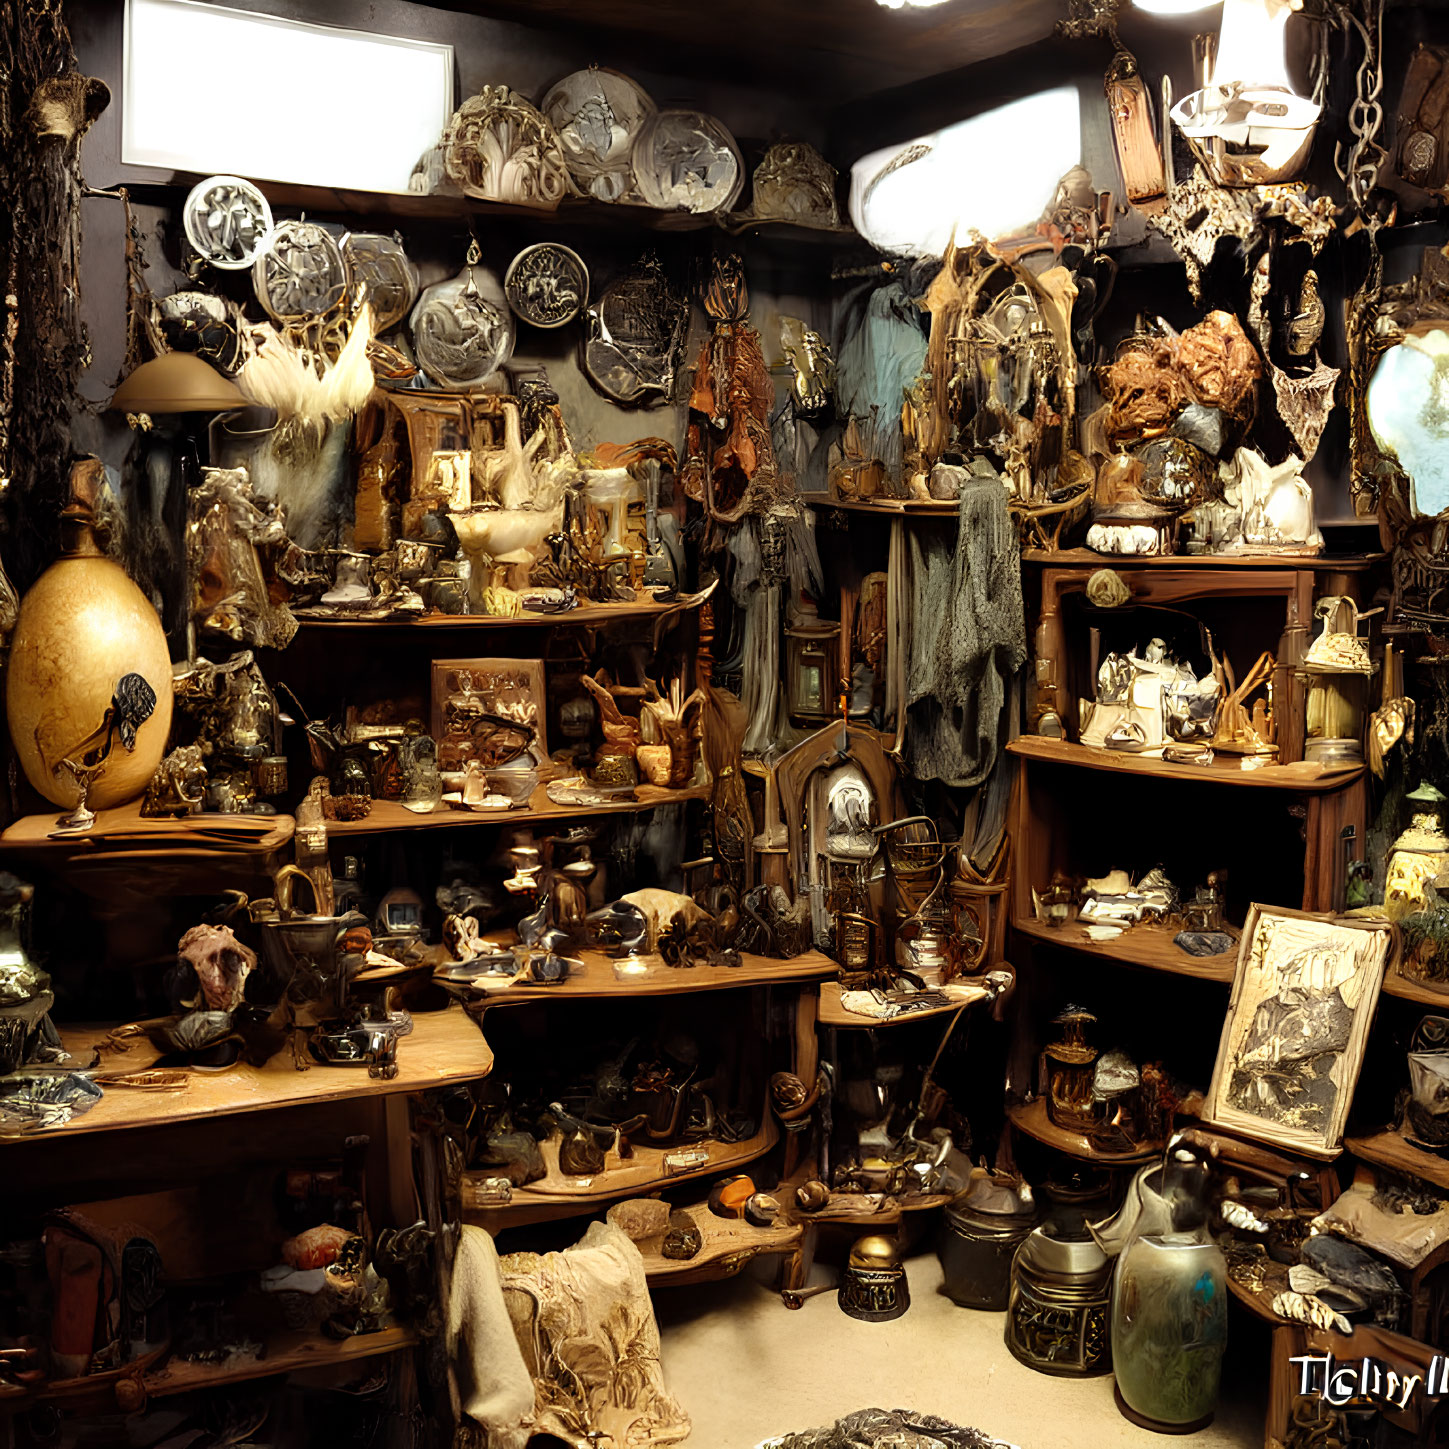 Eclectic antique shop with sculptures, plates, oddities, and artworks in dimly lit cozy setting